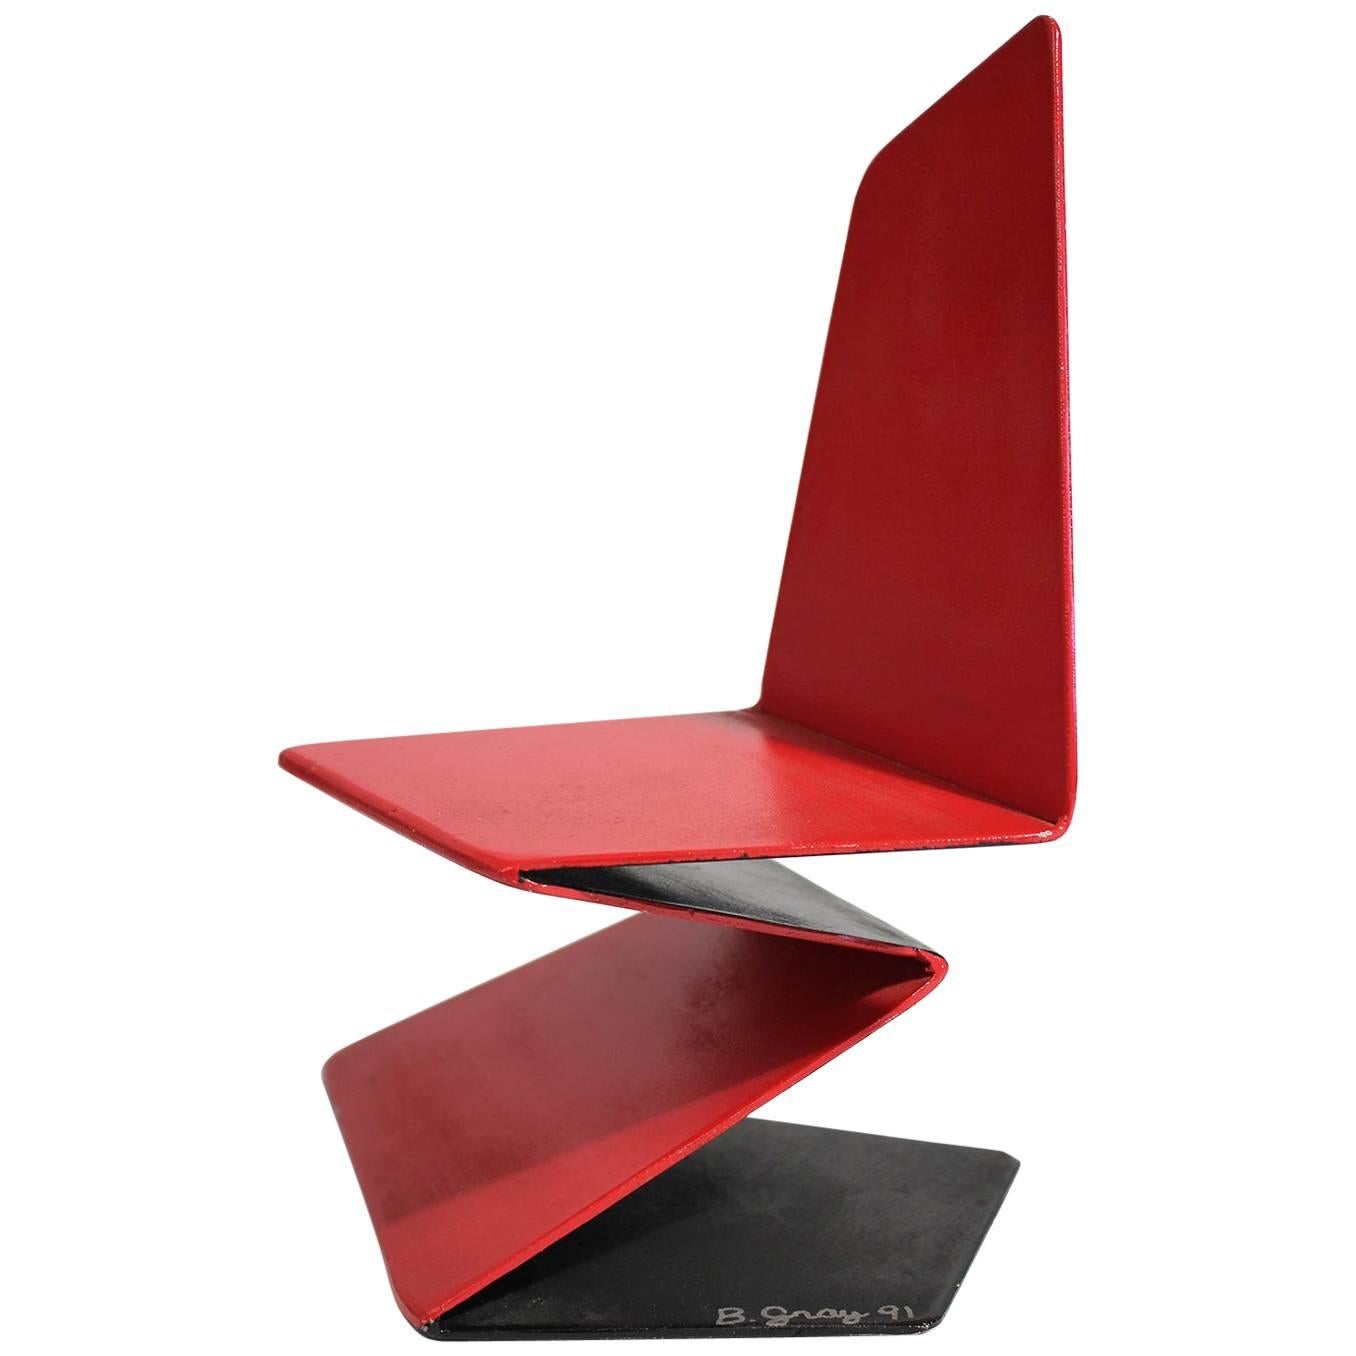 Bruce Gray Abstract Enamel and Steel Furniture Design Model Sculpture For Sale